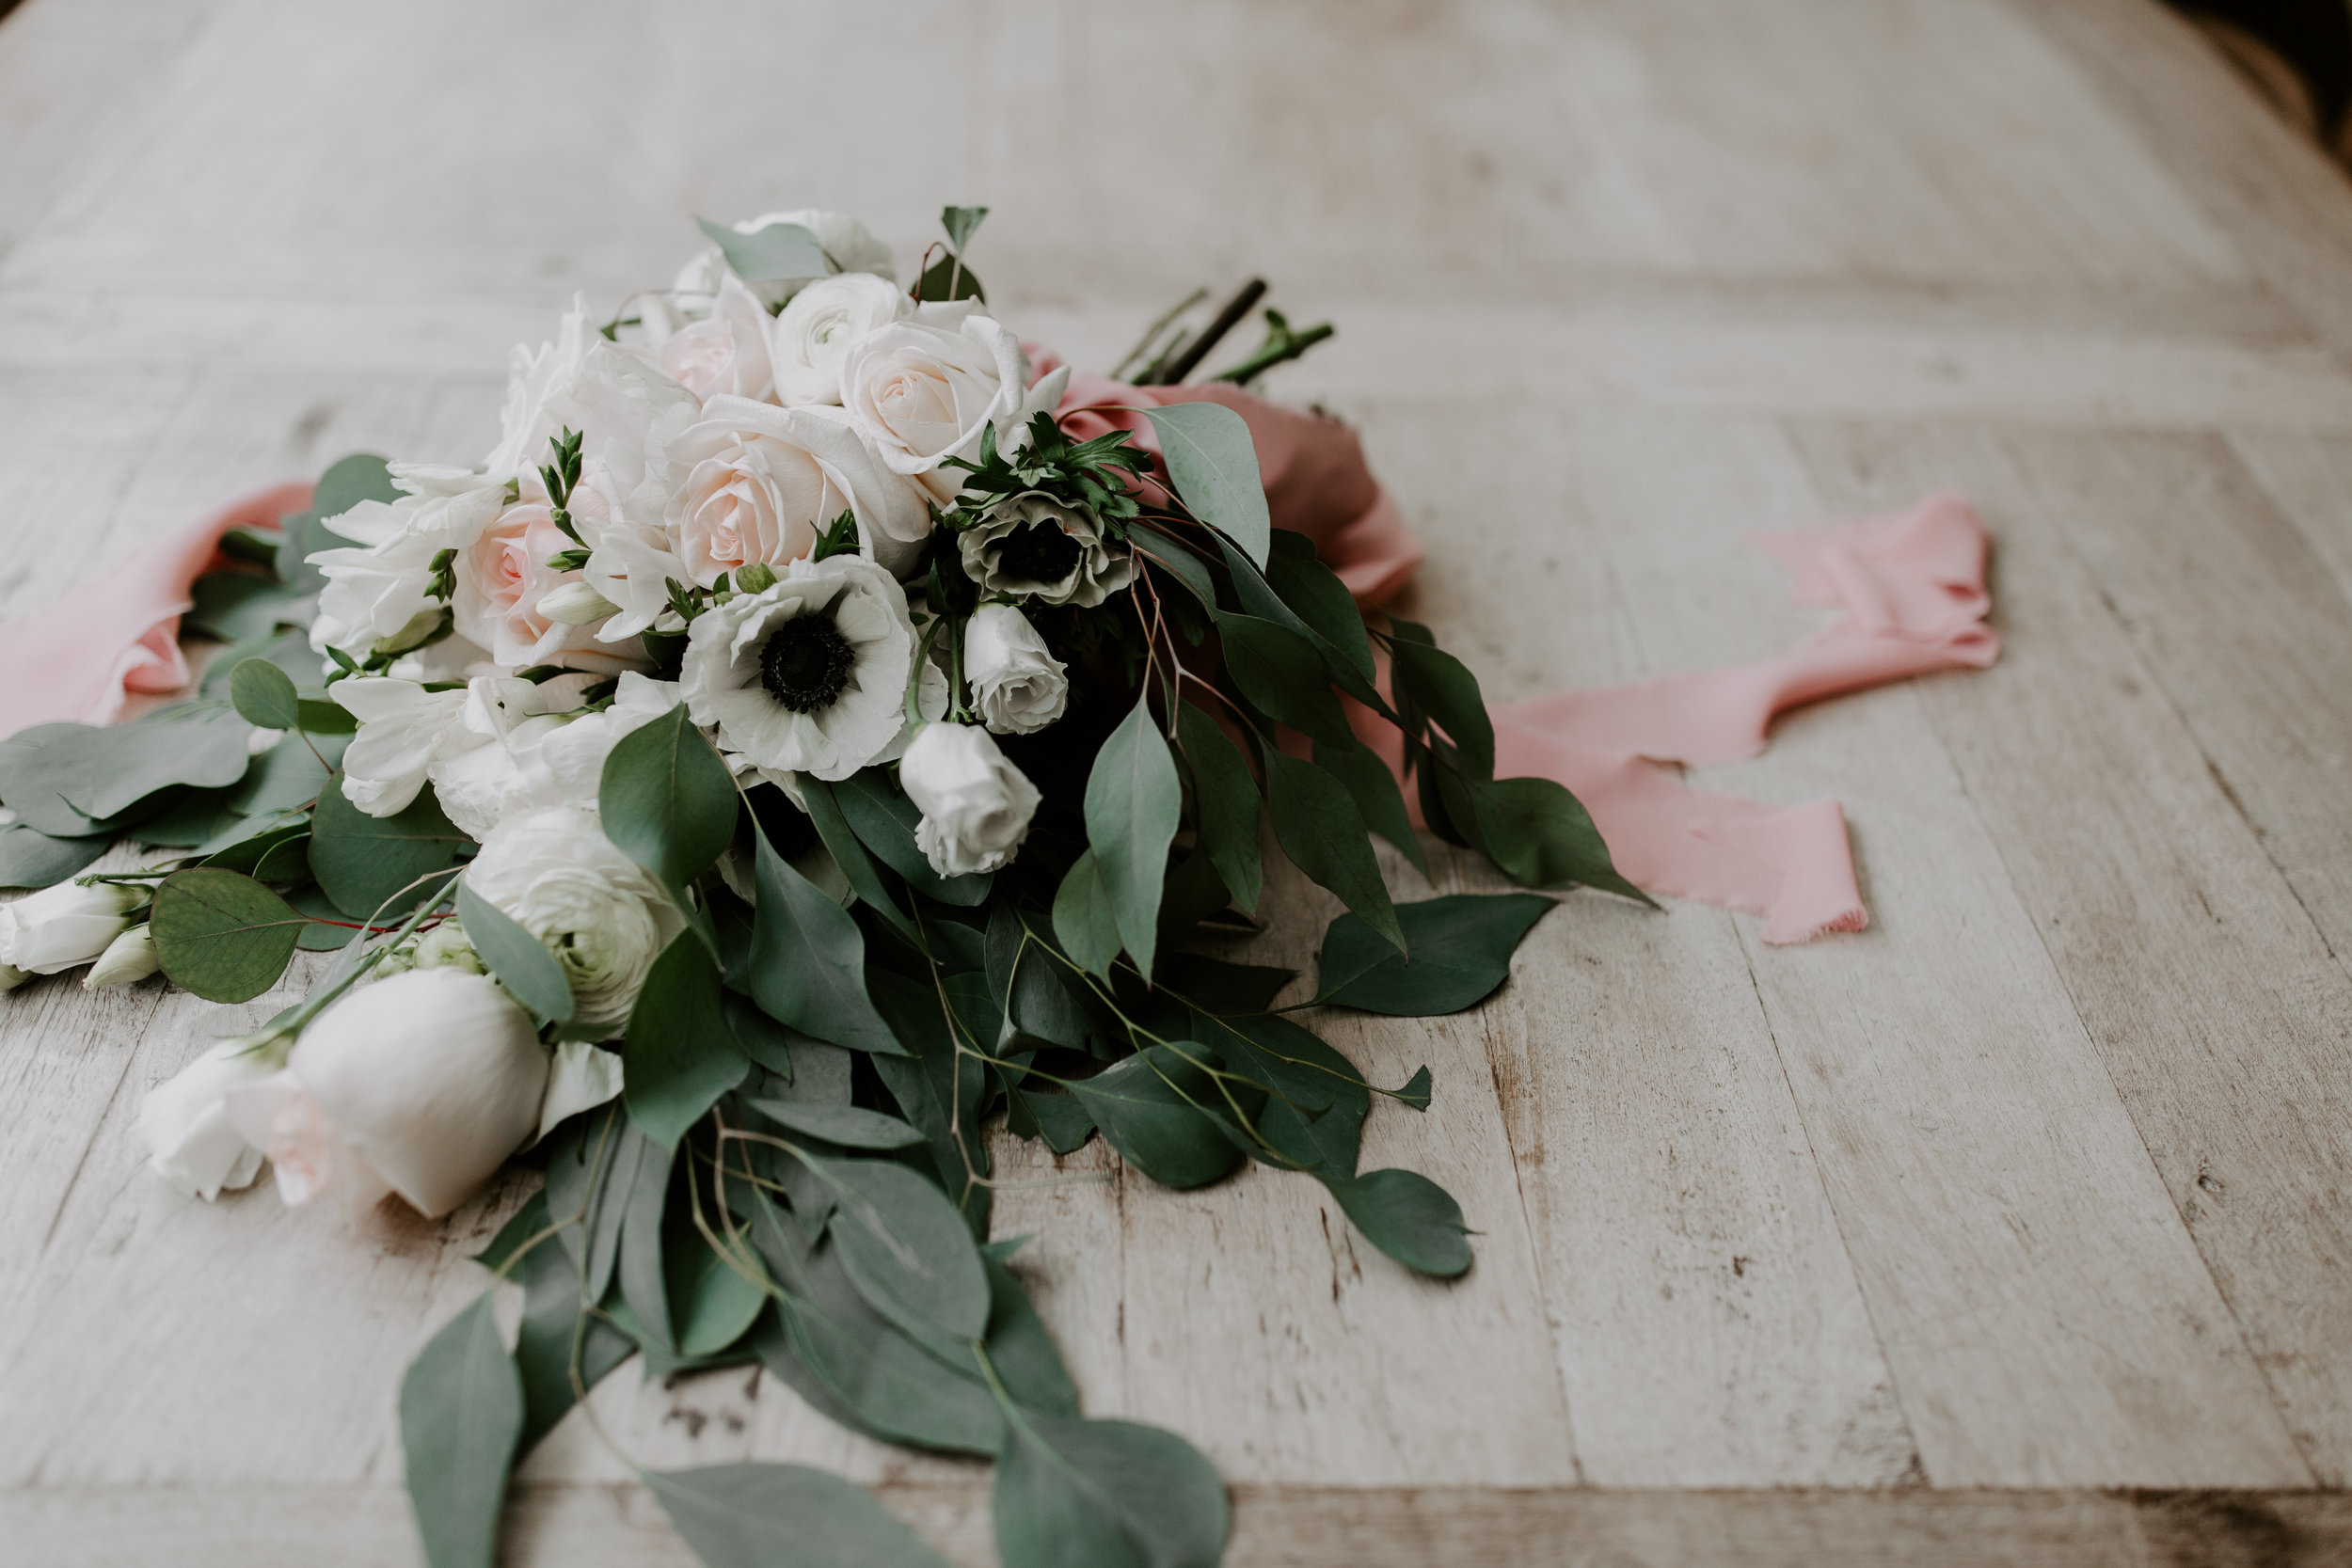 Rustic Bloom Photography | Rustic Bouquet Inspiration